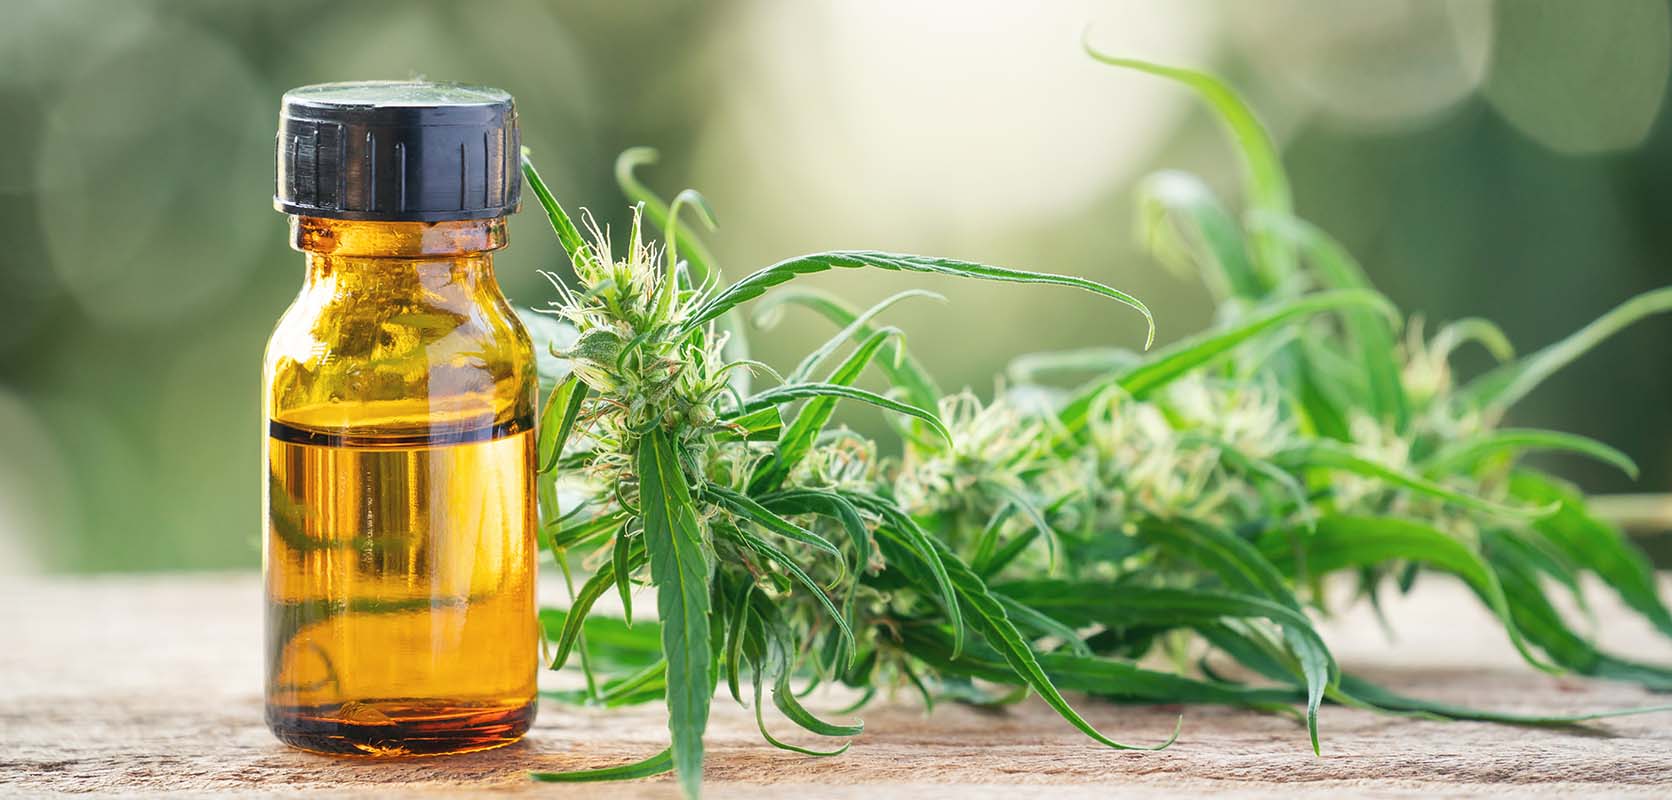 THC oil next to cannabis plant leaves. How much THC oil to feel relaxed? Buy cannabis oil online from weed dispensary for mail order marijuana. 